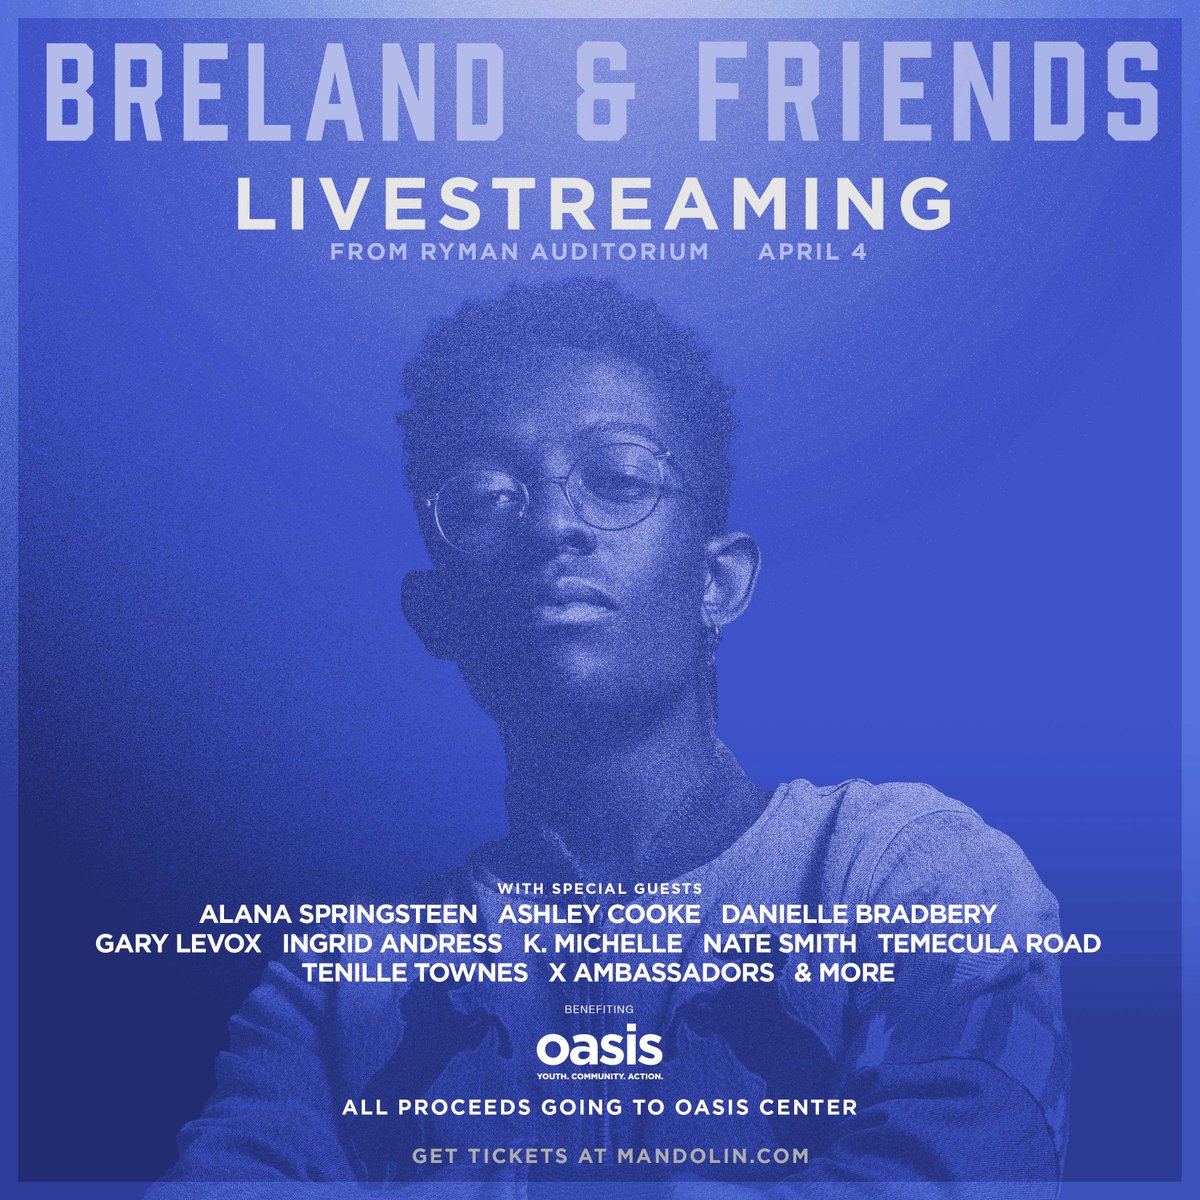 BRELAND & Friends just got bigger! So happy to officially announce that we'll be live streaming the entire concert, courtesy of my friends @mandolinlive. Tickets are on sale now and 100% of the proceeds are going to the Oasis Center 🙏🏾 breland.lnk.to/BFLivestream